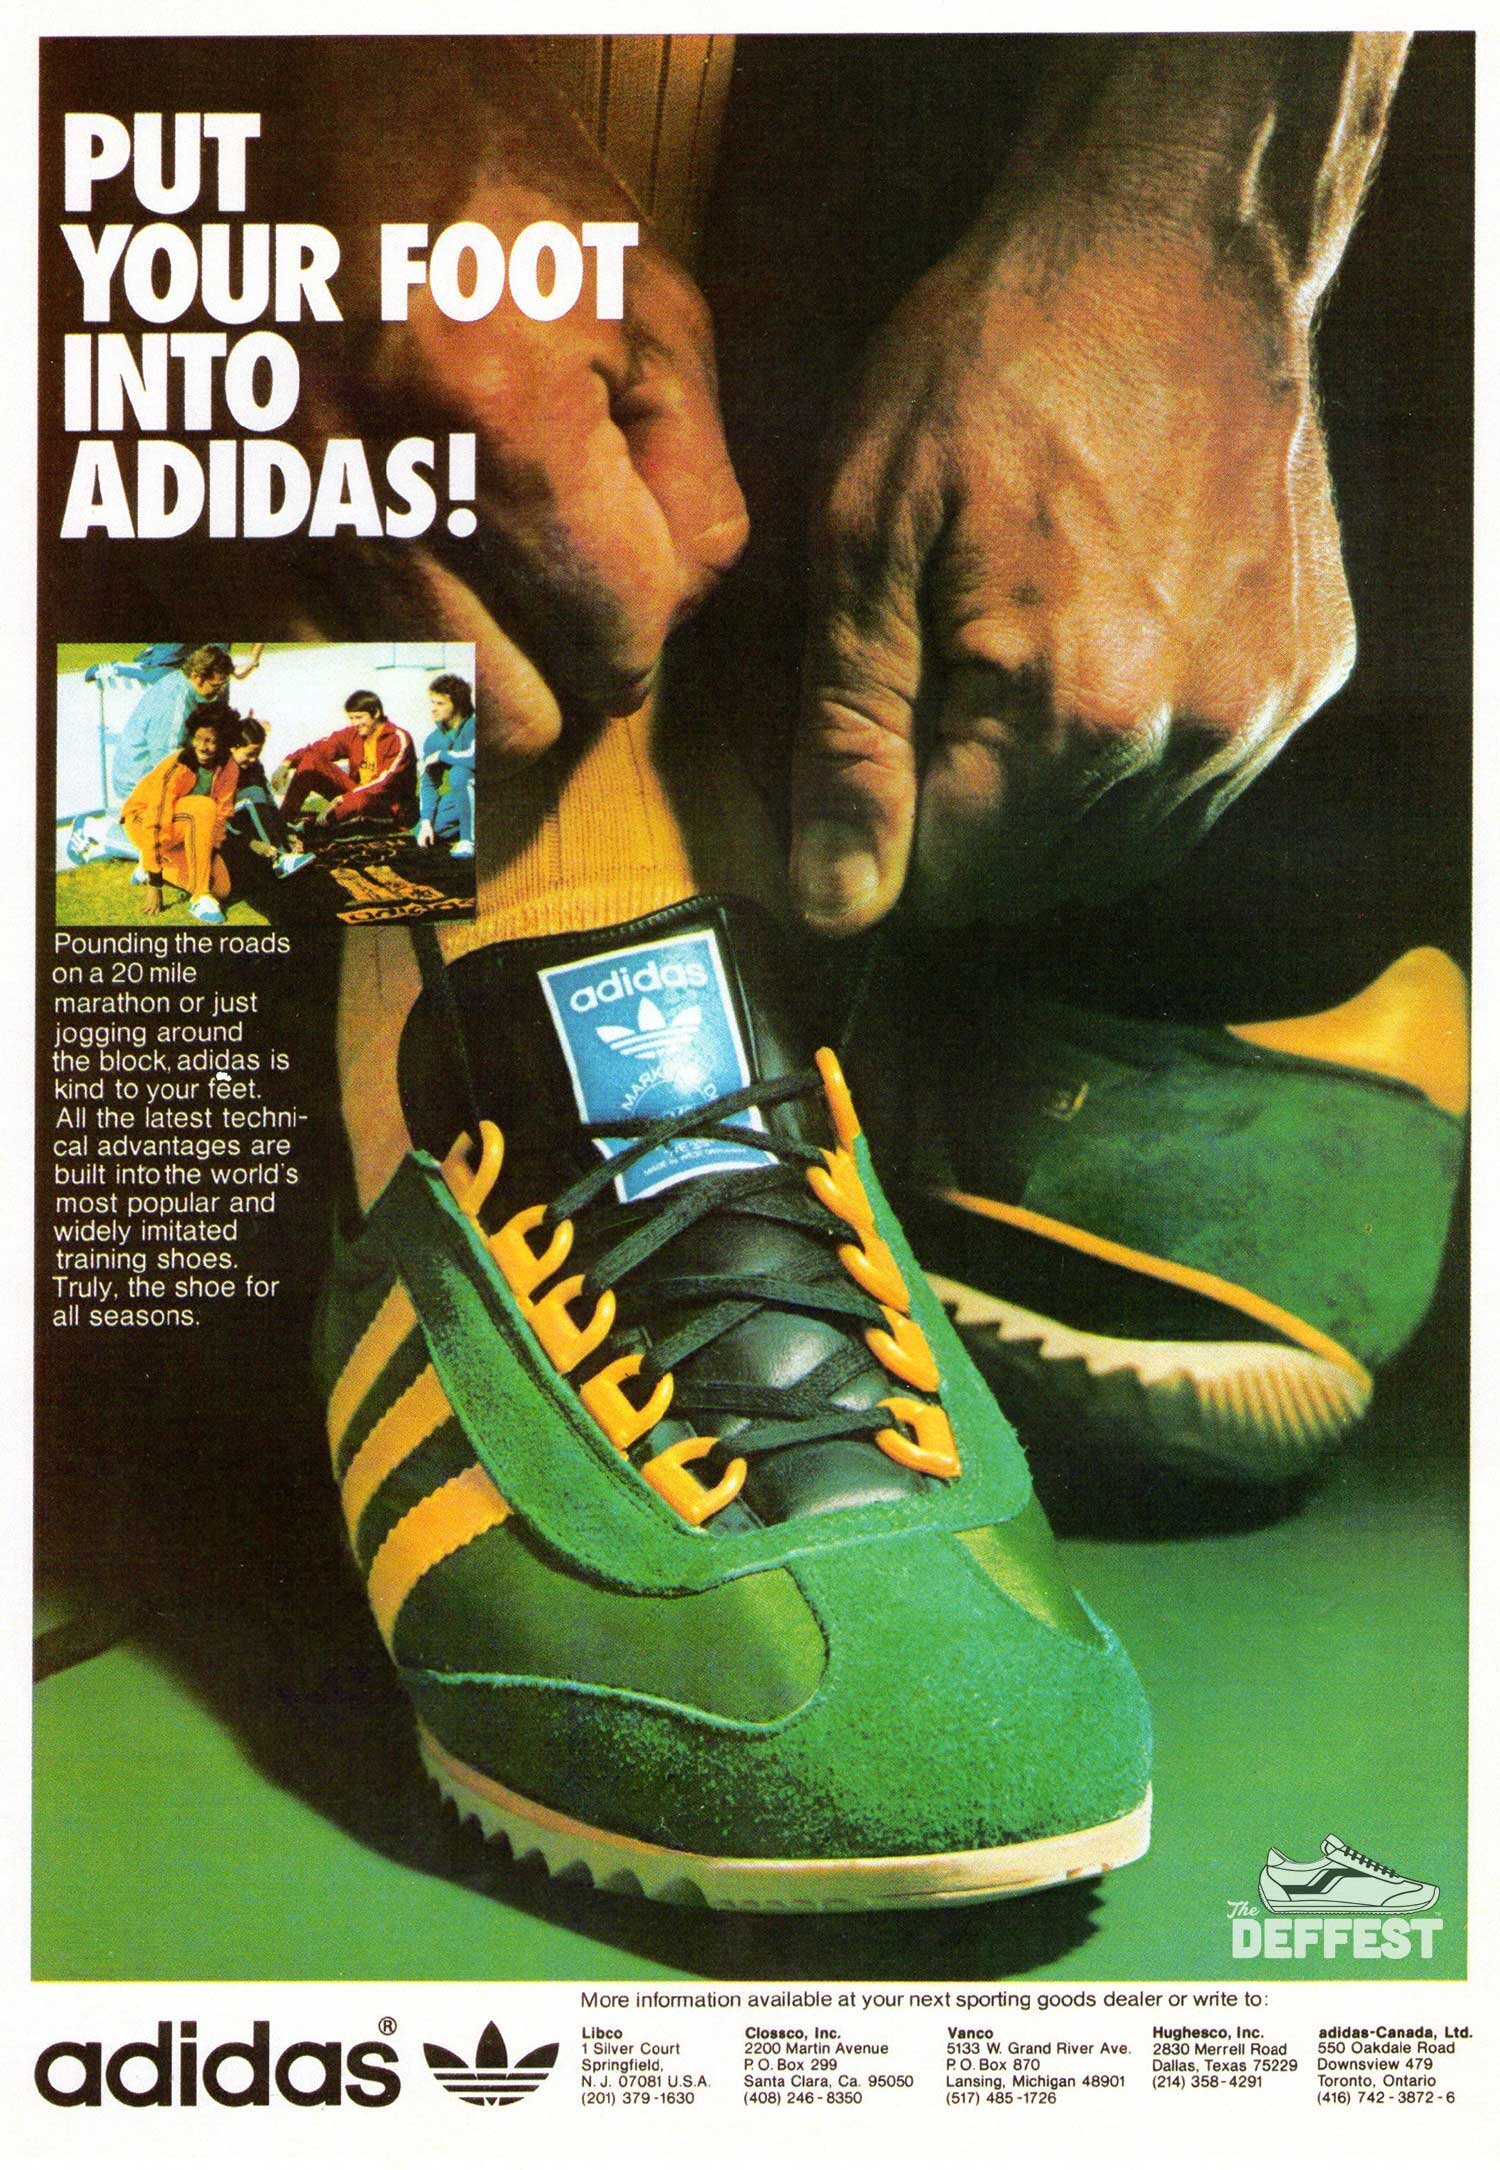 Cambiarse de ropa Majestuoso seco vintage adidas sneakers — The Deffest®. A vintage and retro sneaker blog. —  Vintage Ads